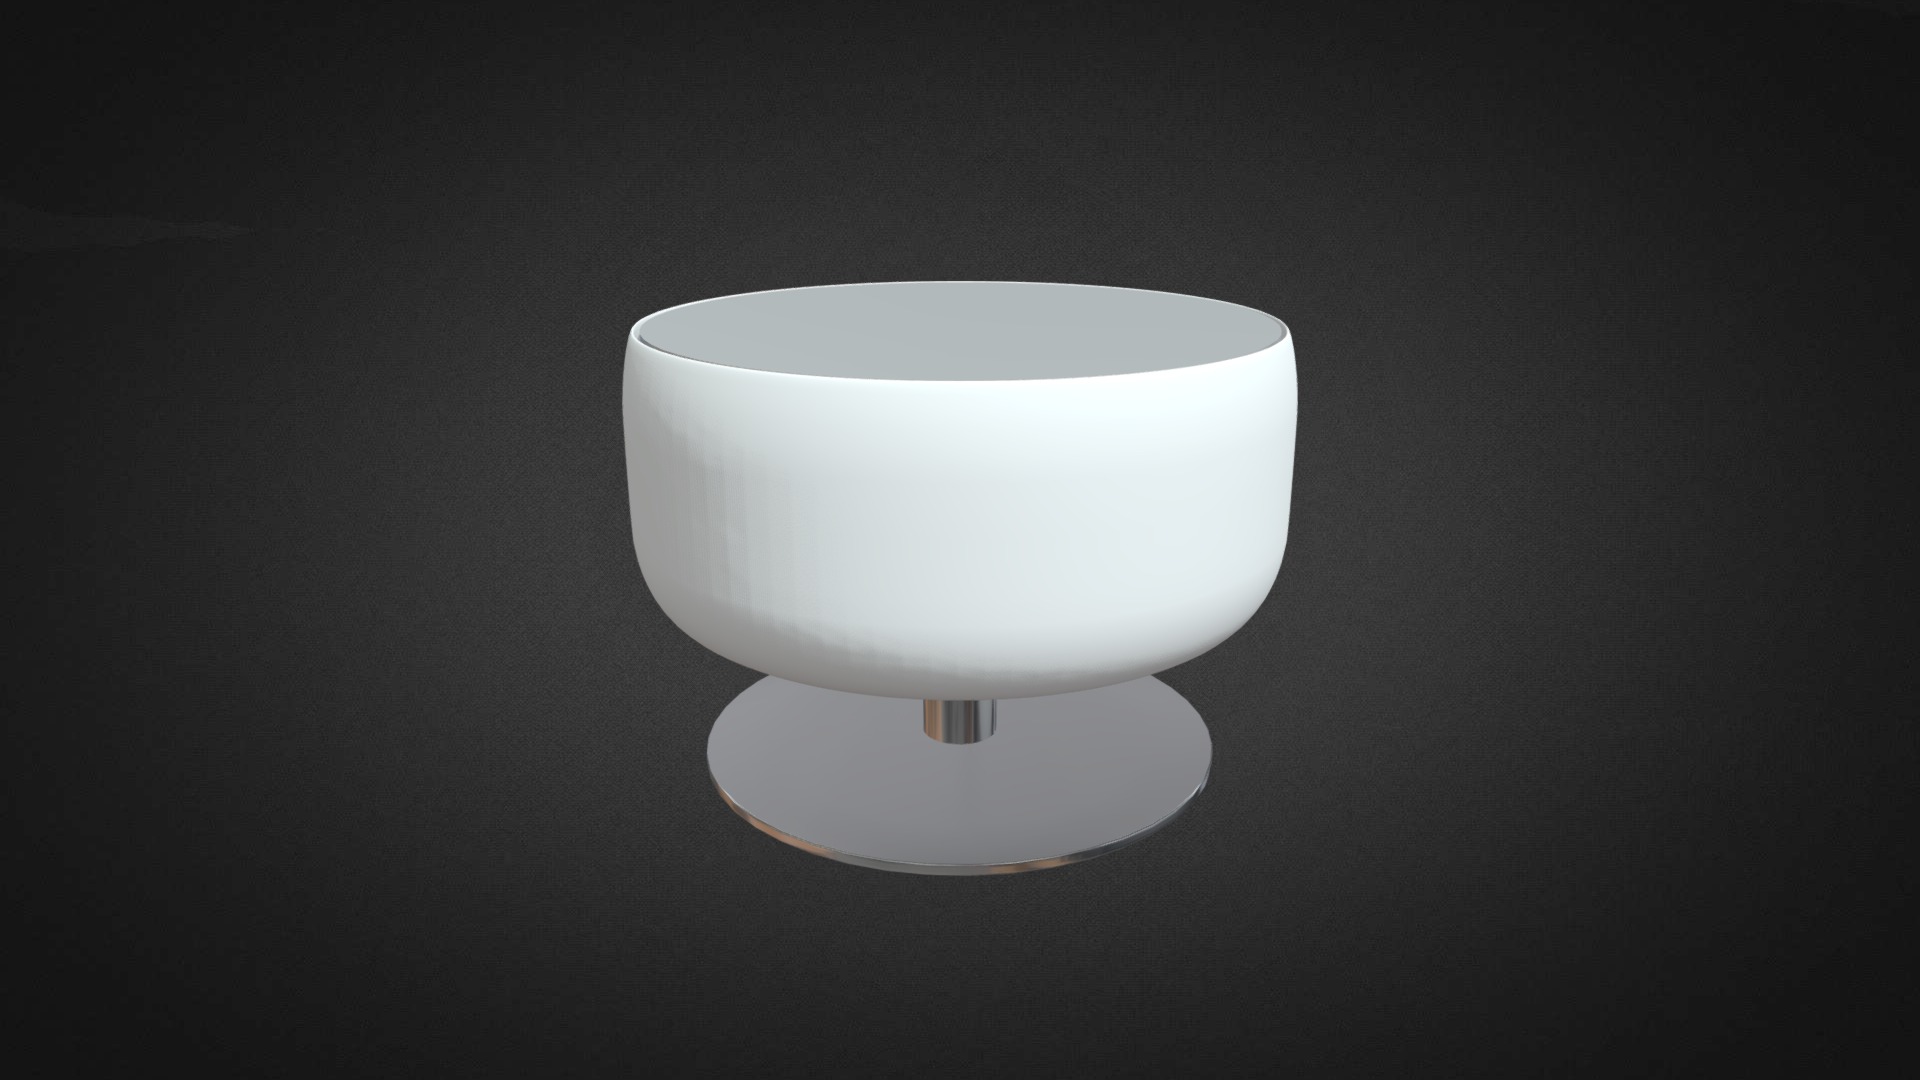 3D model Dott Table Hire - This is a 3D model of the Dott Table Hire. The 3D model is about a white lamp on a black background.